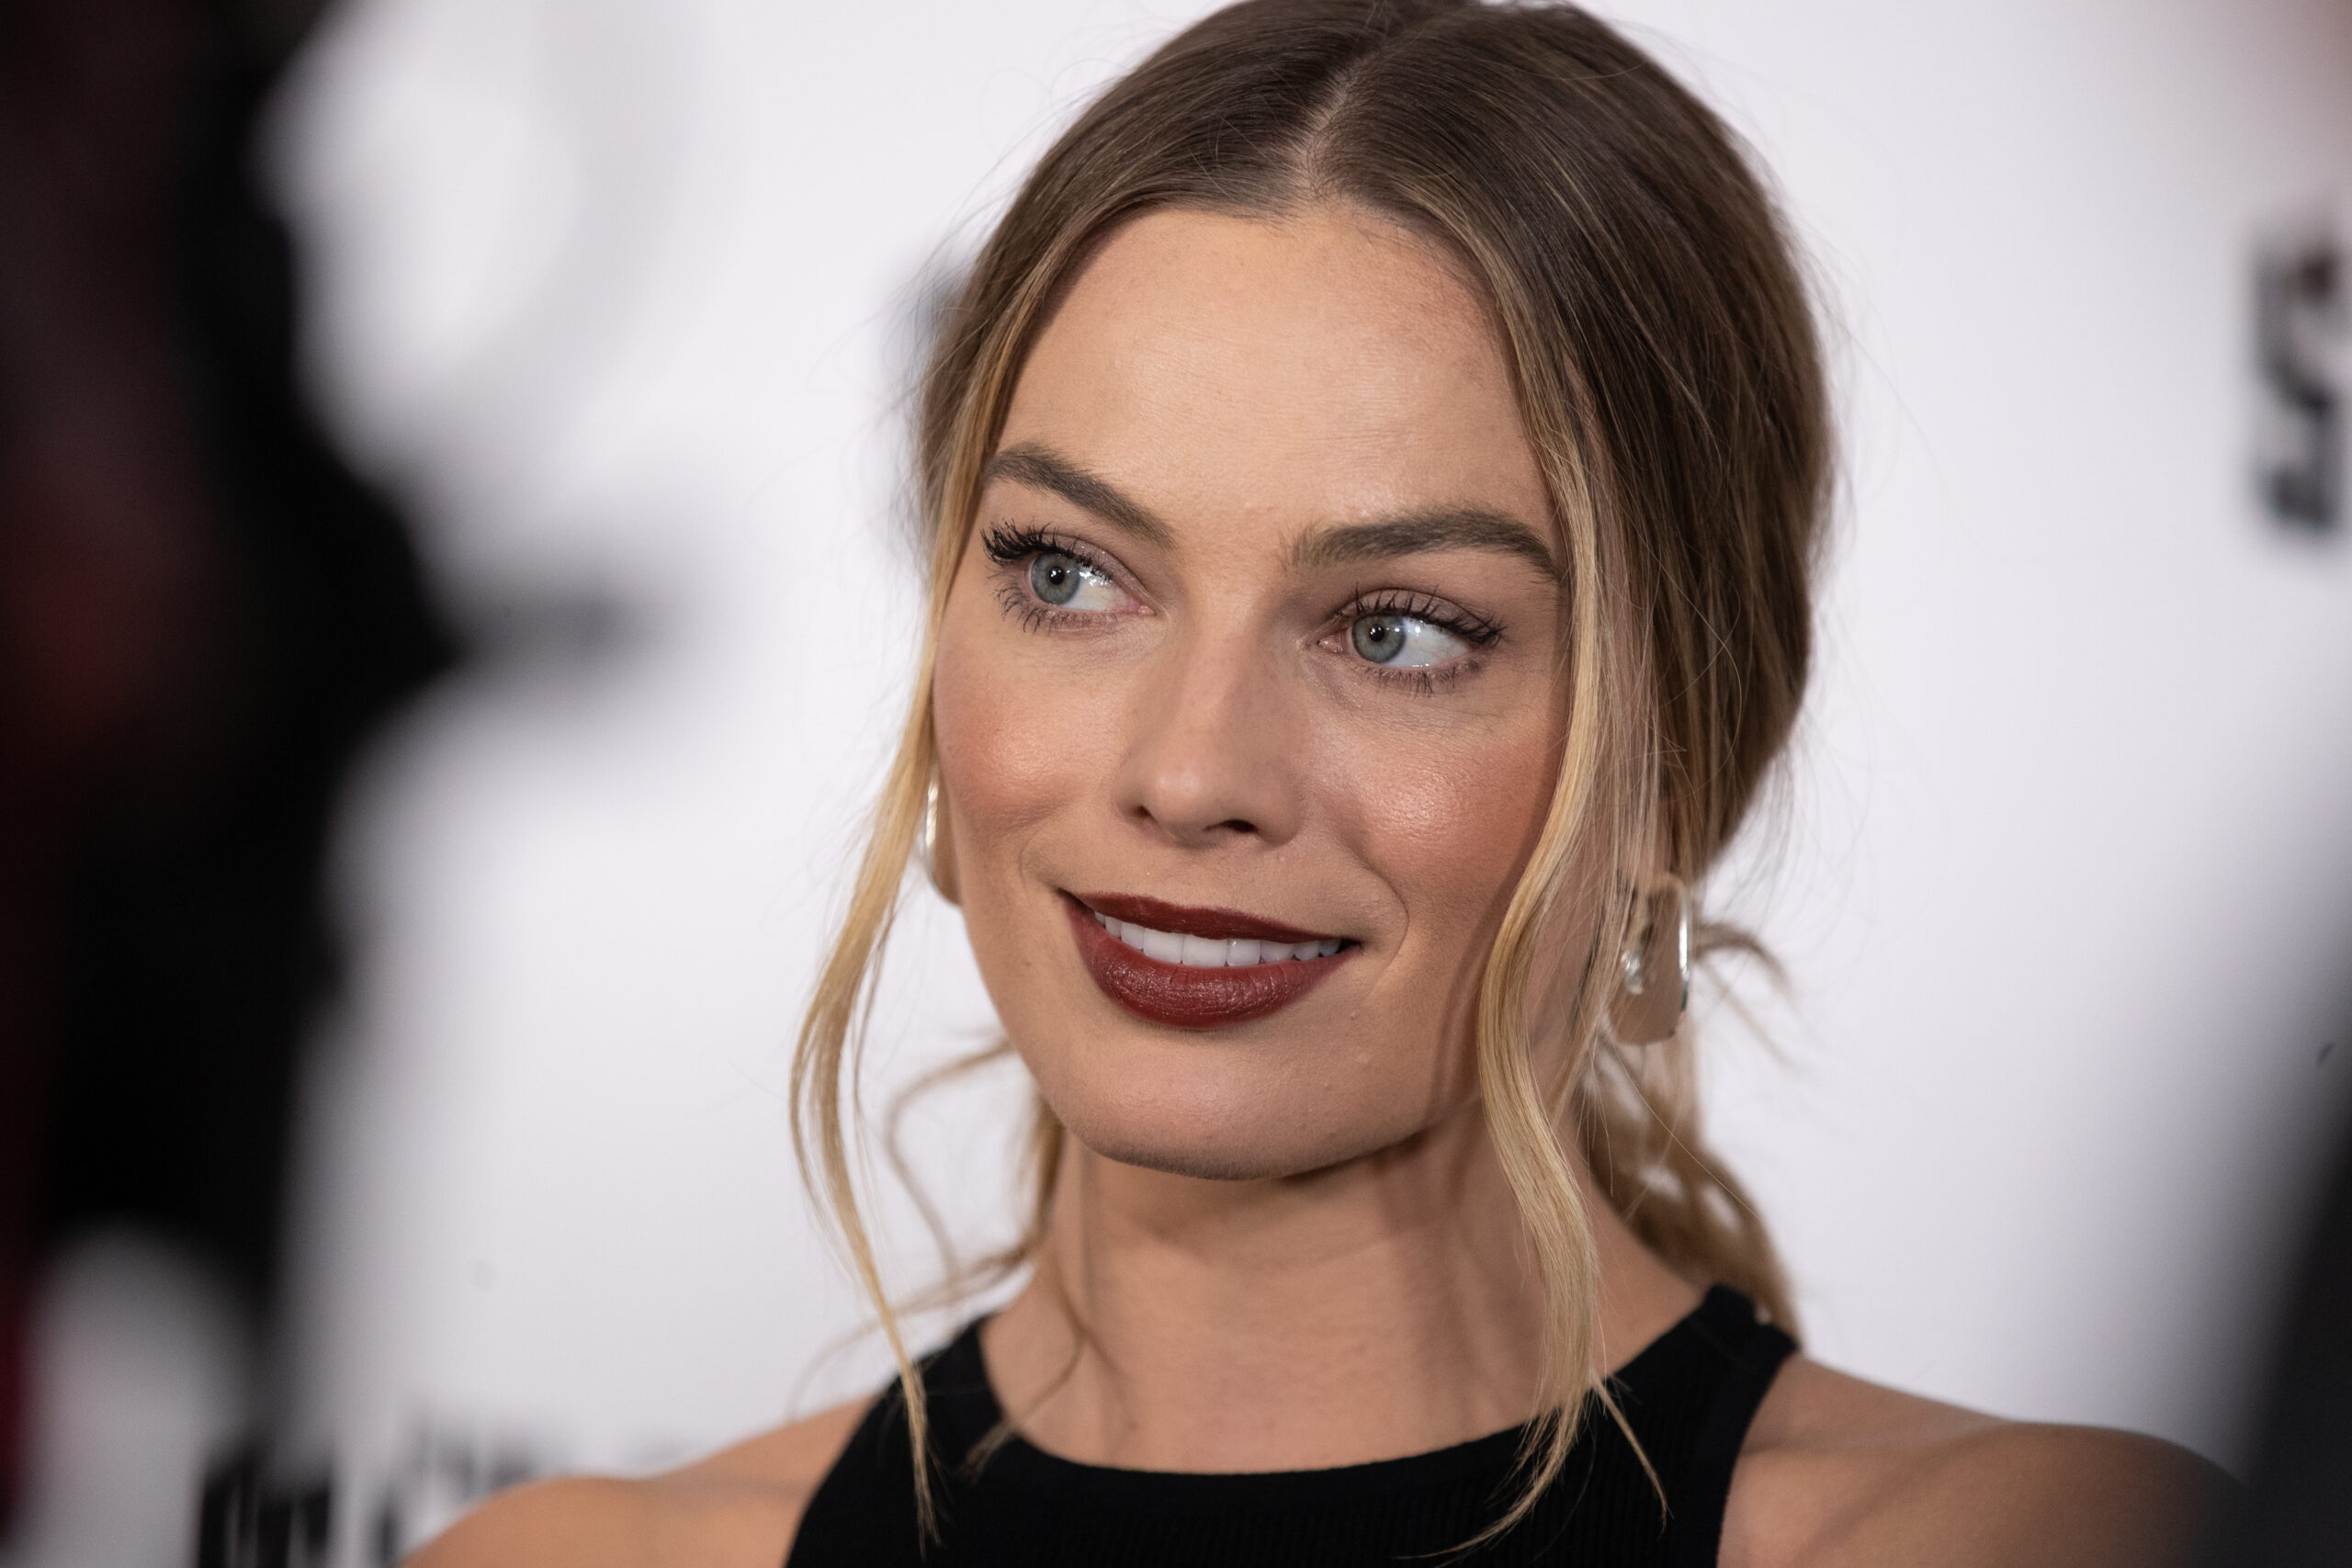 What does Margot Robbie think about SF? Here’s what she had to say at the SFFILM Awards